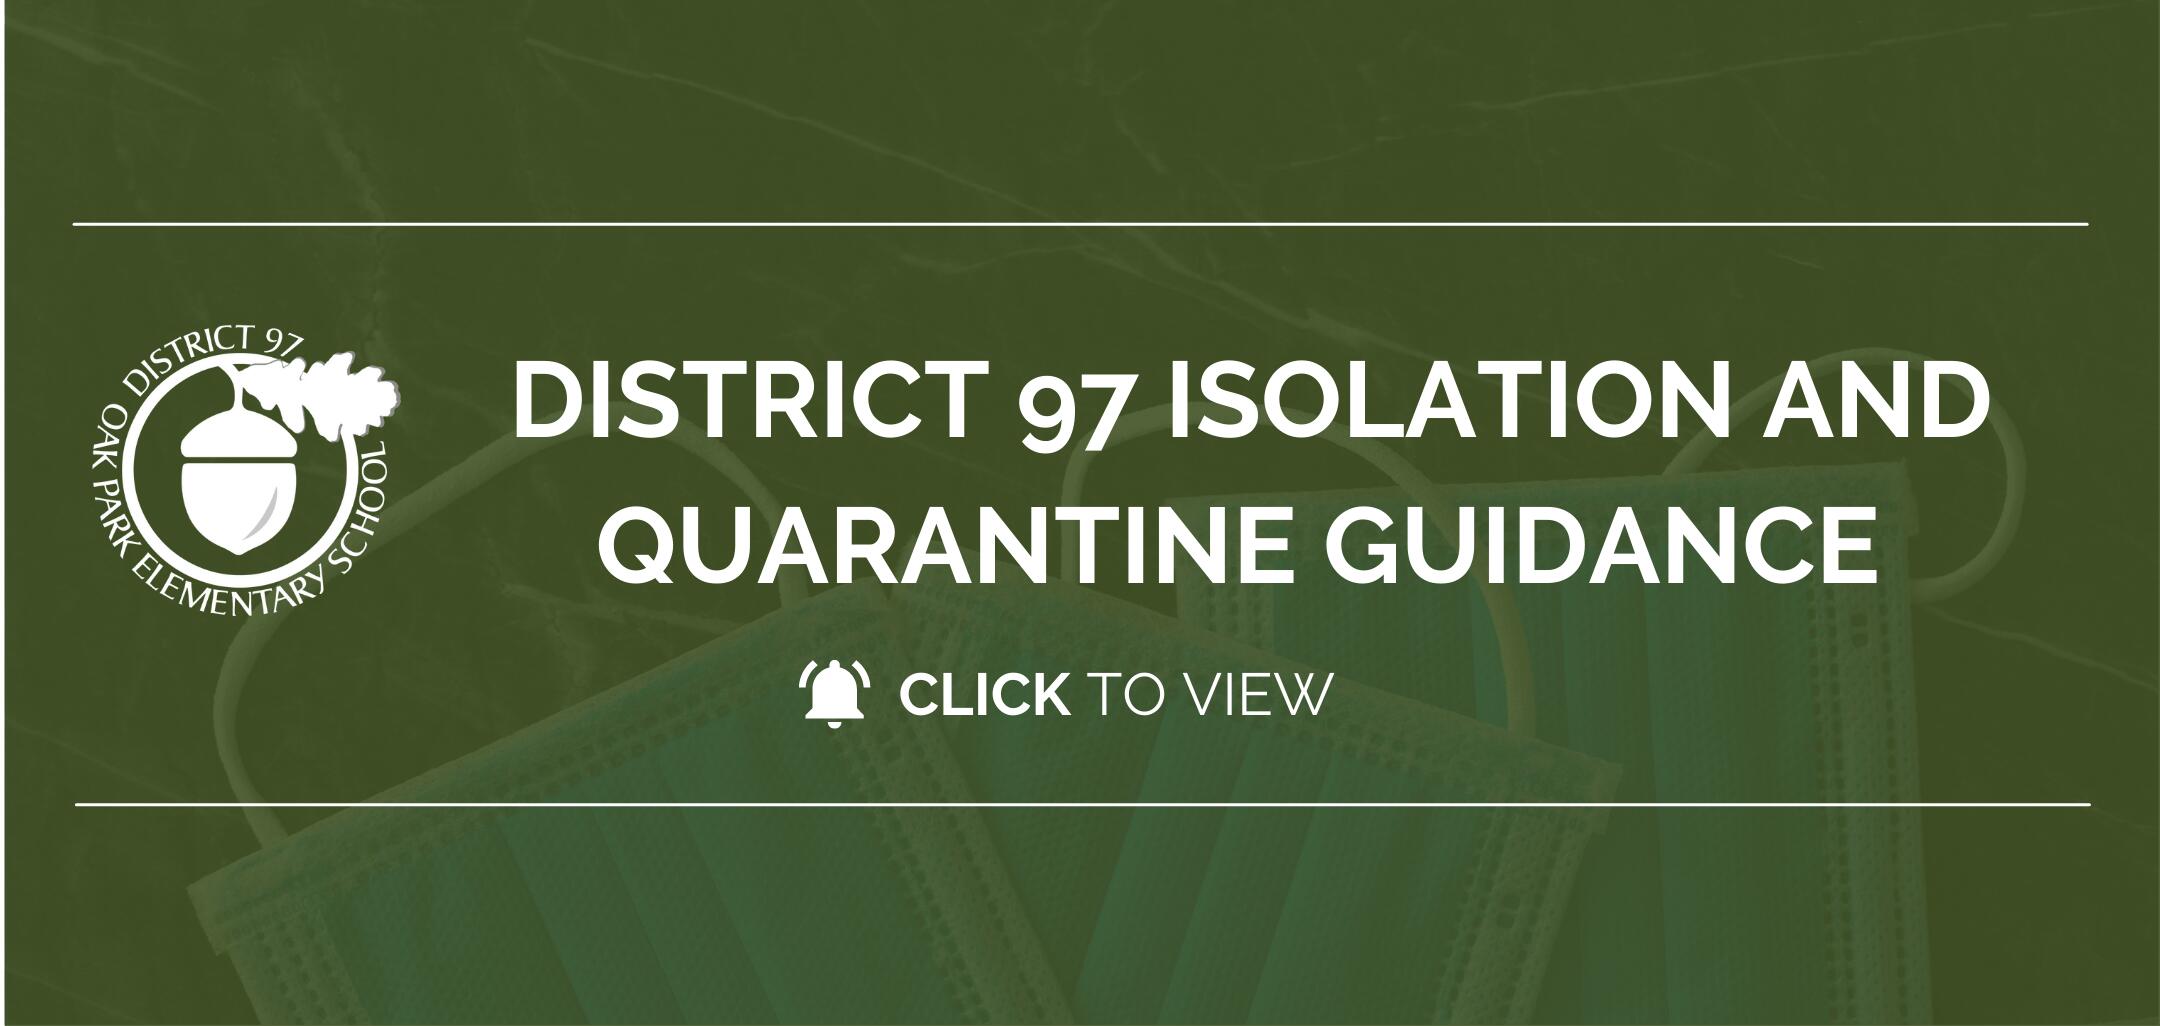 District 97 Isolation and Quarantine Guidance